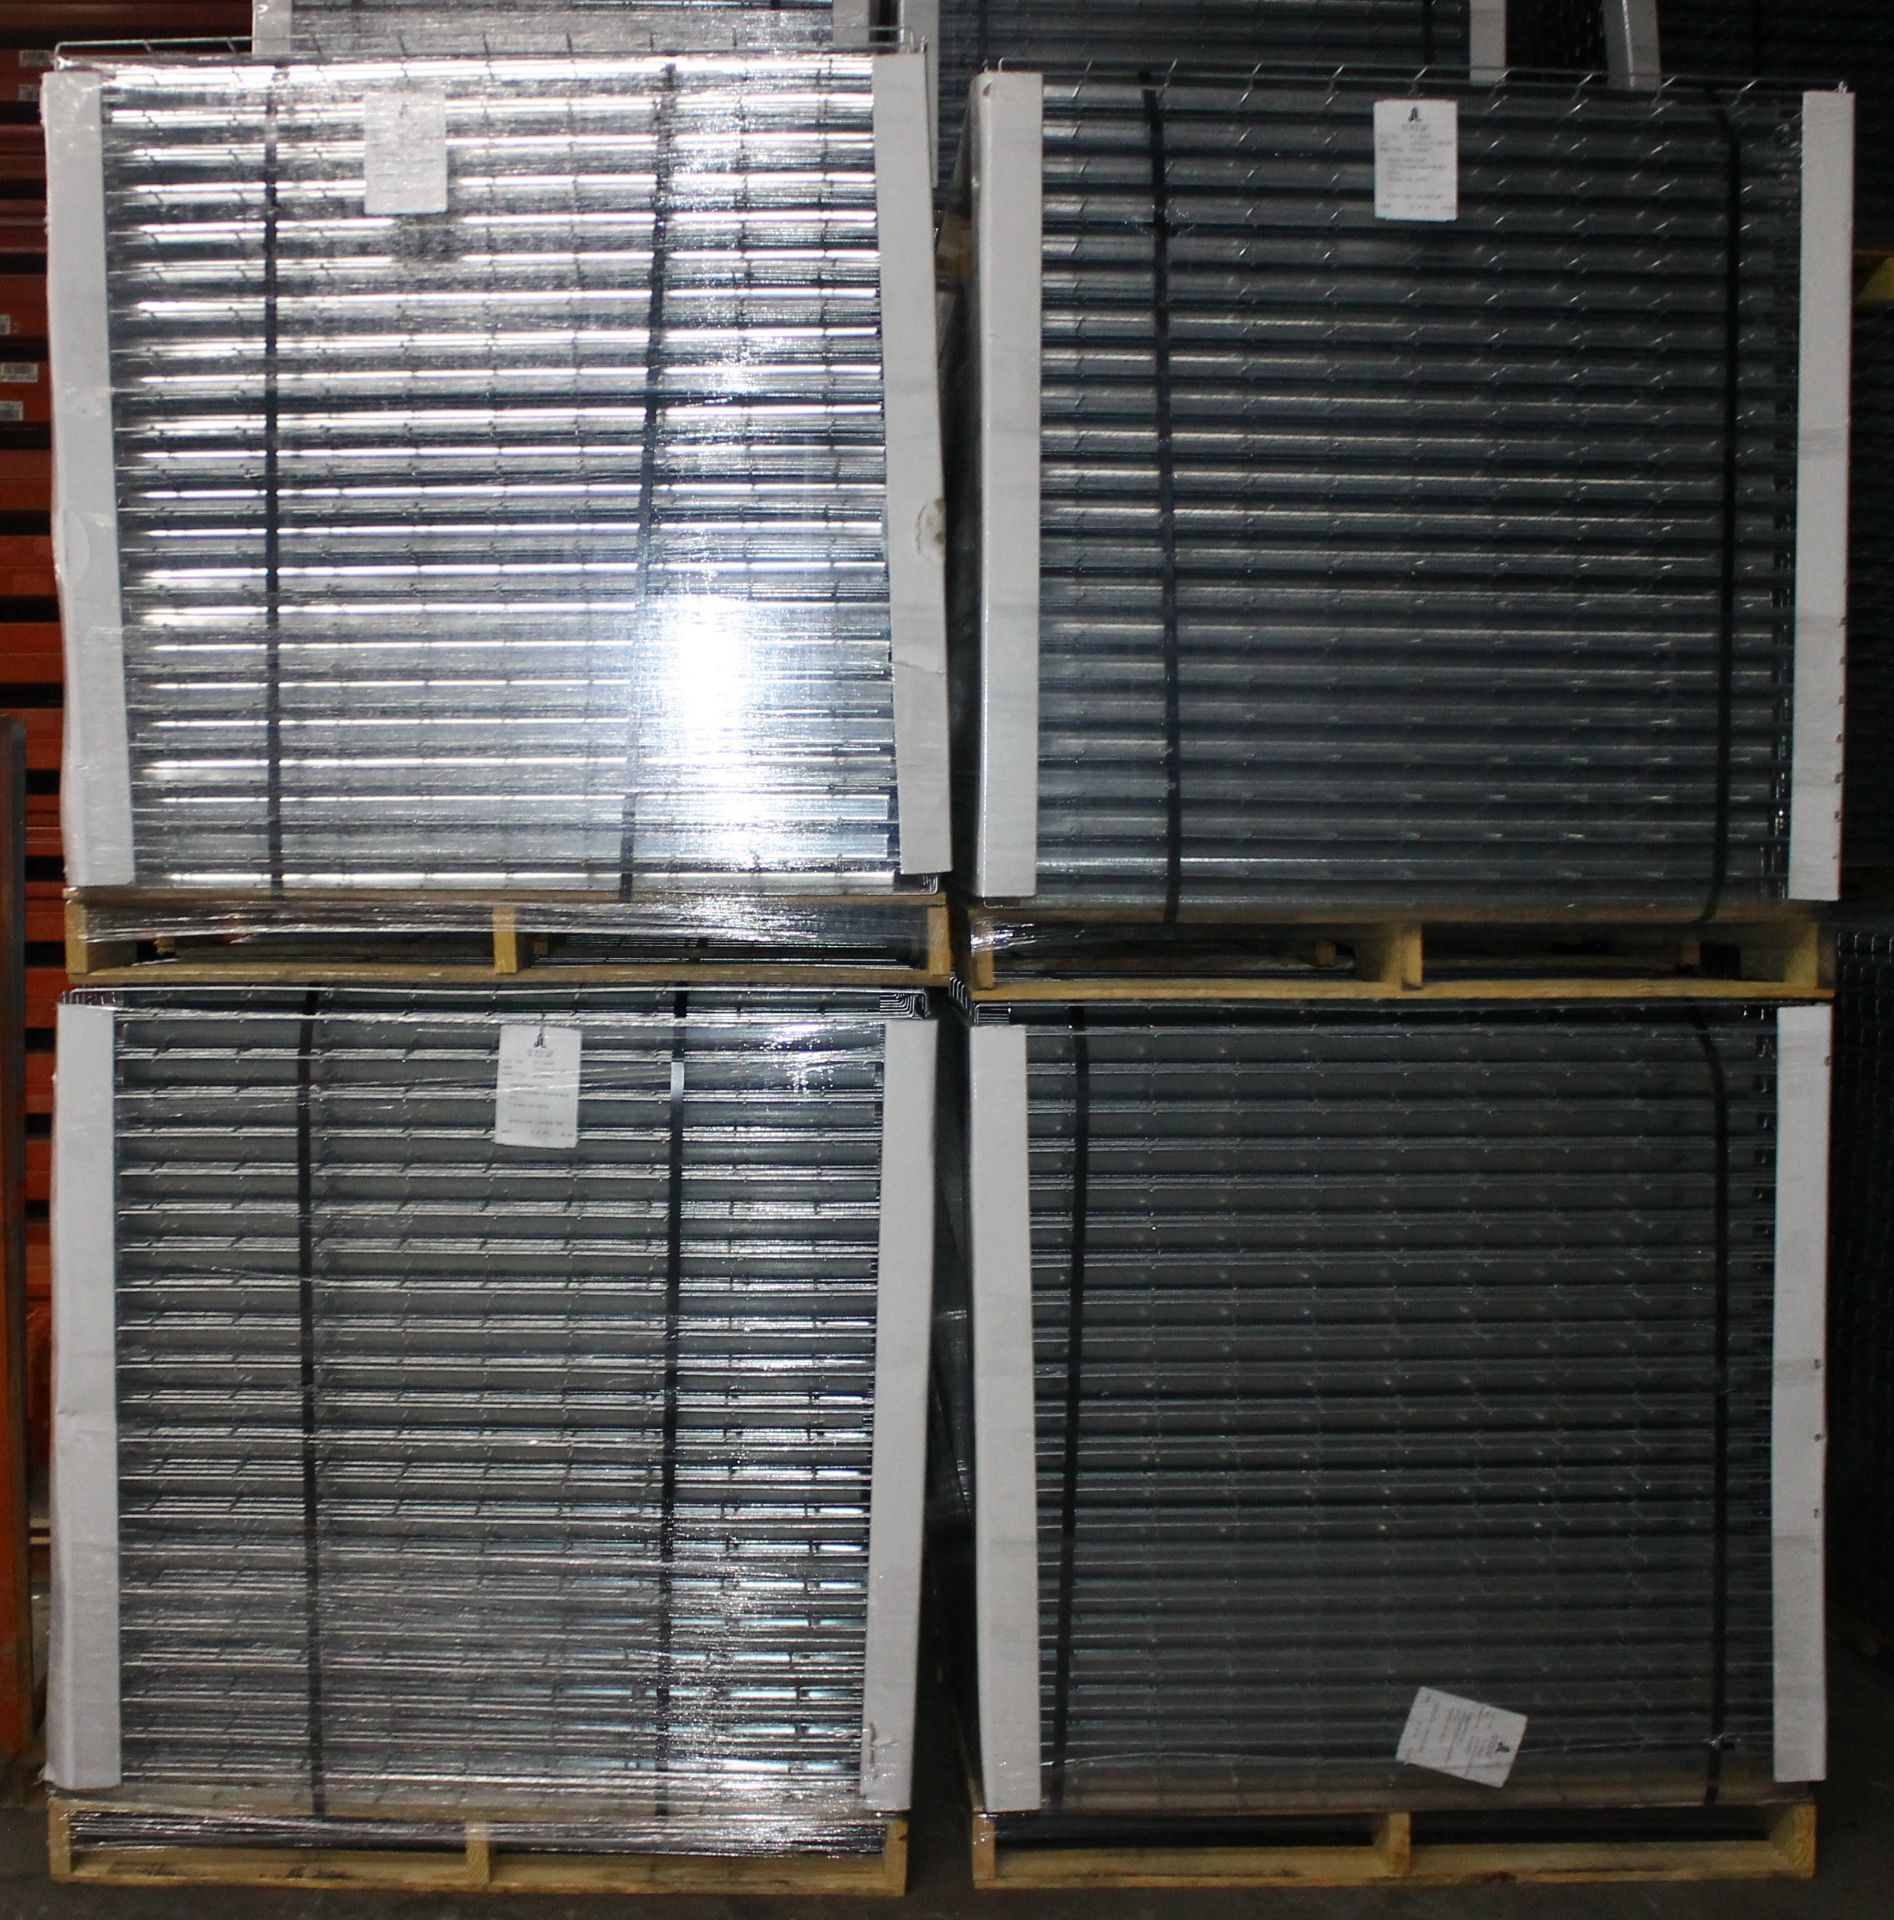 NEW 80 PCS OF STANDARD 42" X 52" WIREDECK - 2250 LBS CAPACITY